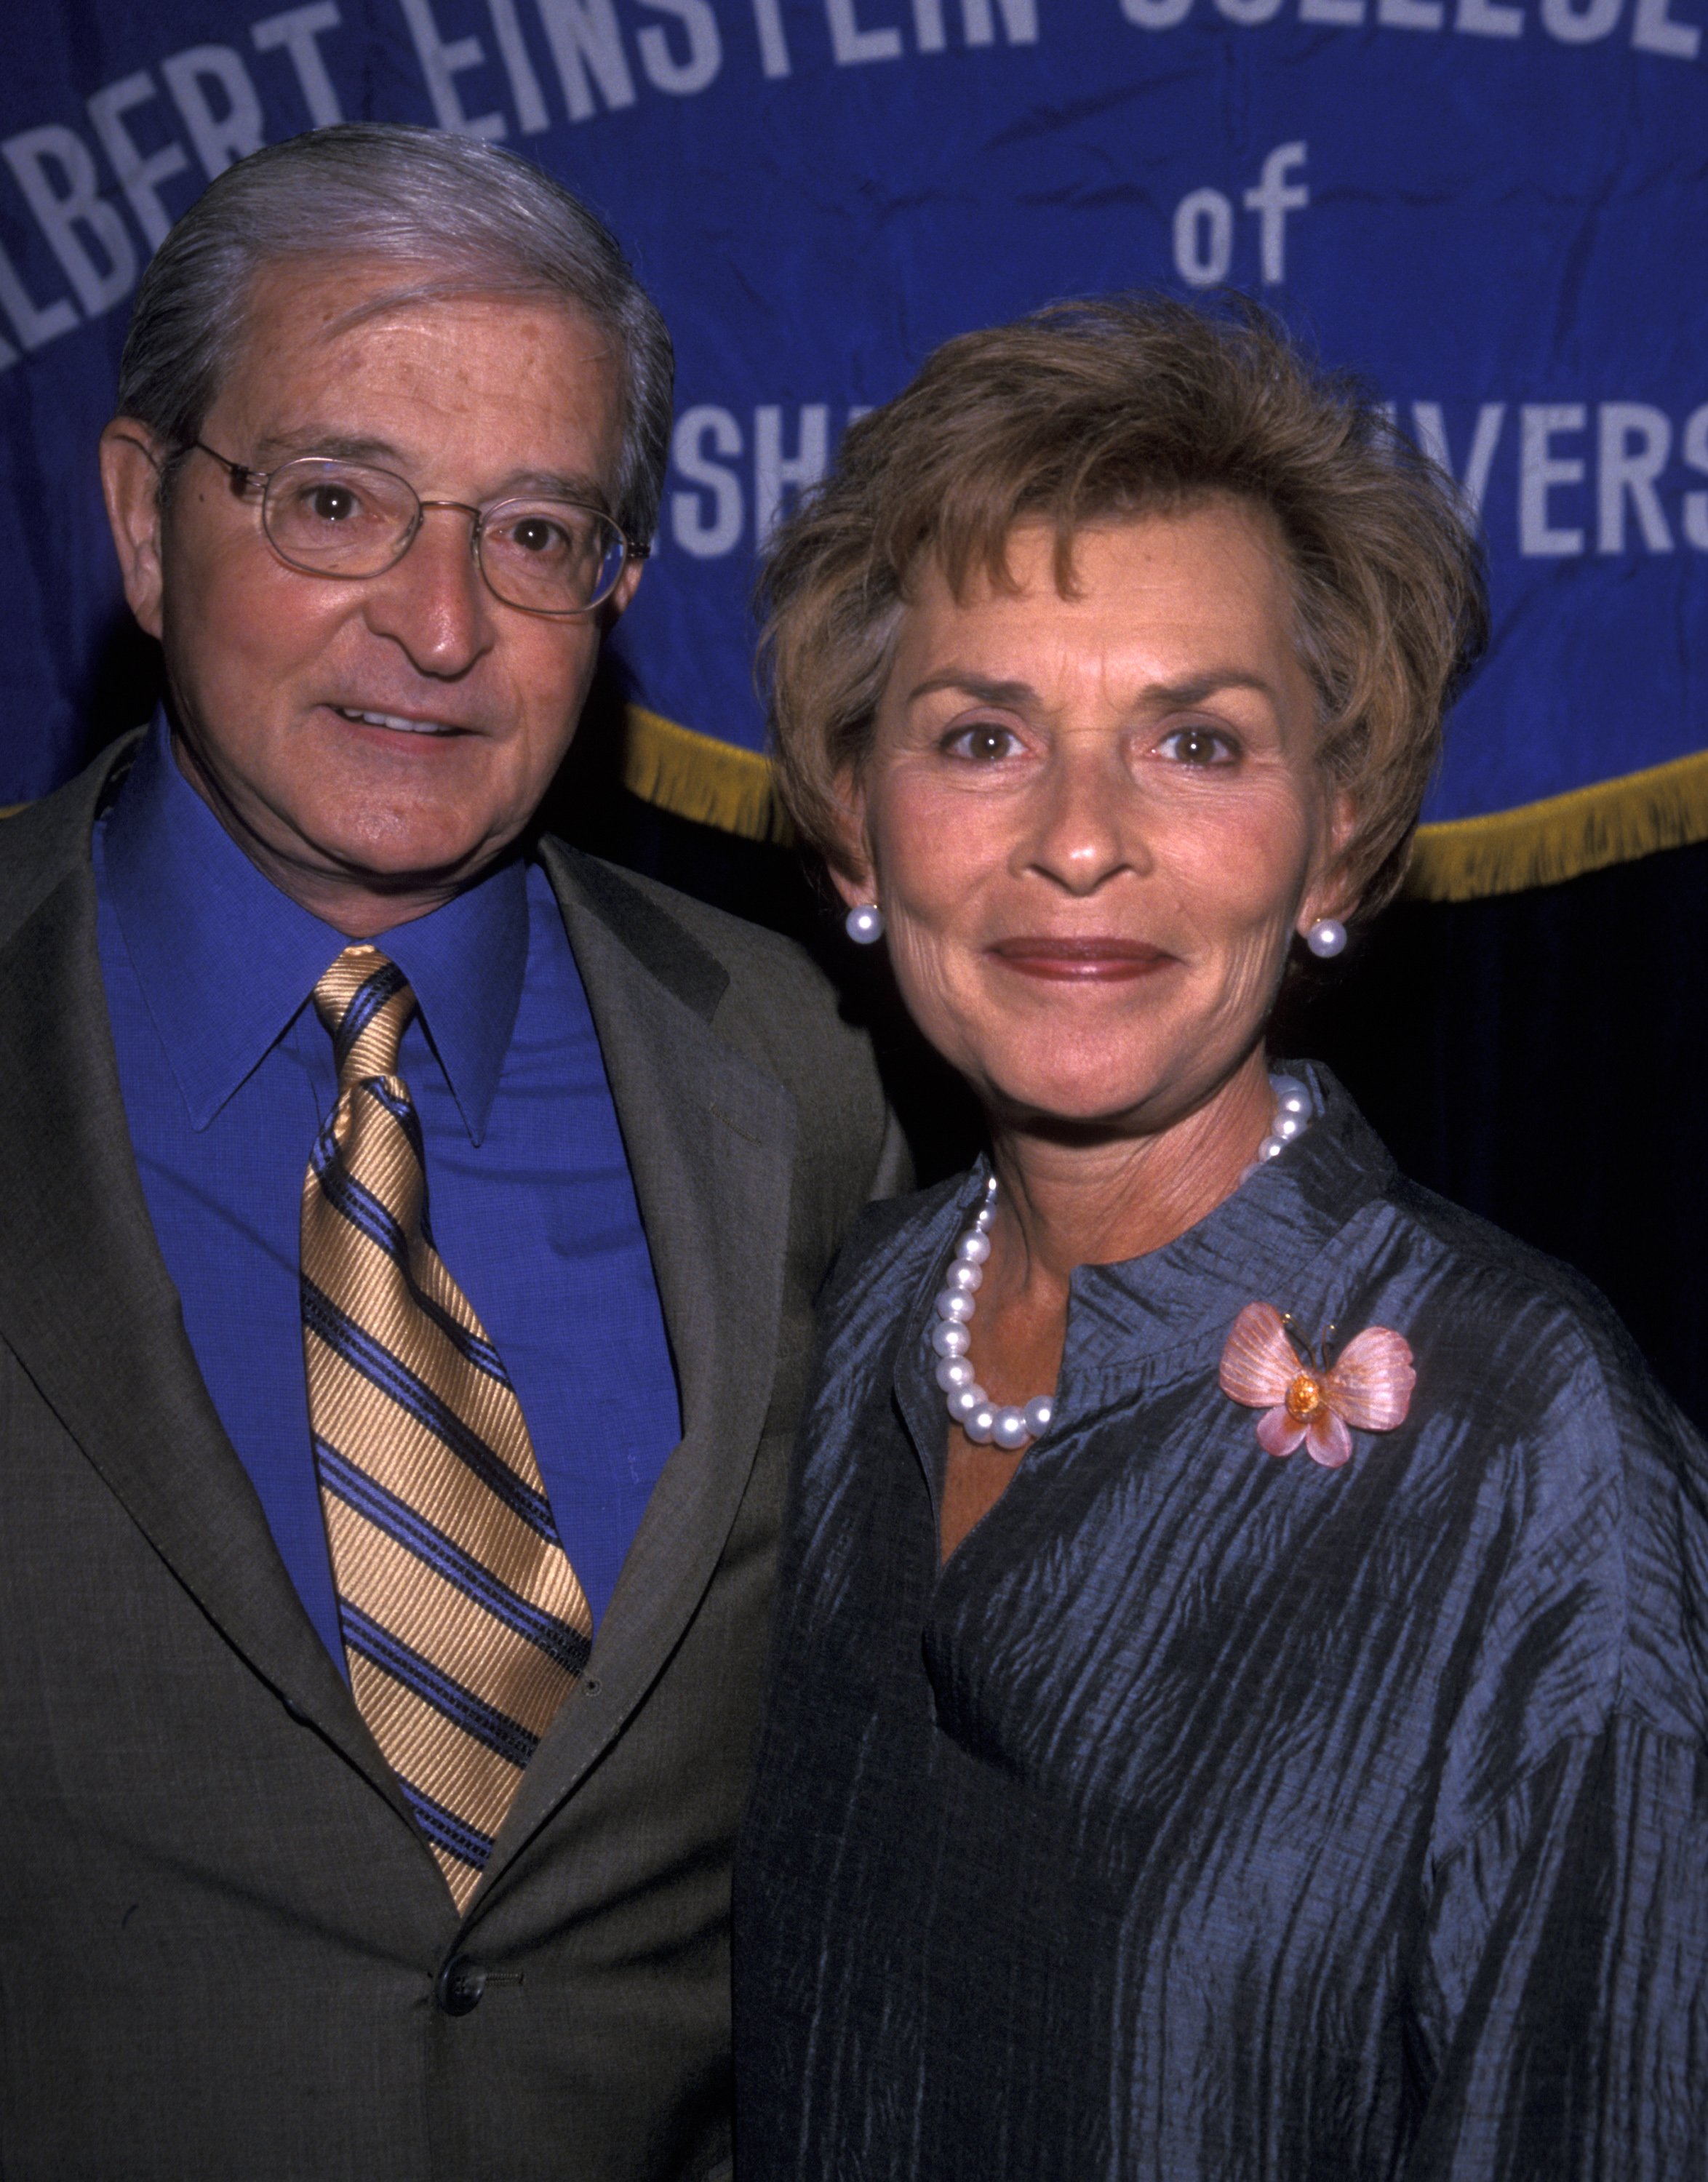 Jerry Sheindlin and Judy Sheindlin at 46th Annual Spirit of Achievement Luncheon on May 1, 2000 at the Waldorf Astoria Hotel in New York City. | Source: Getty Images